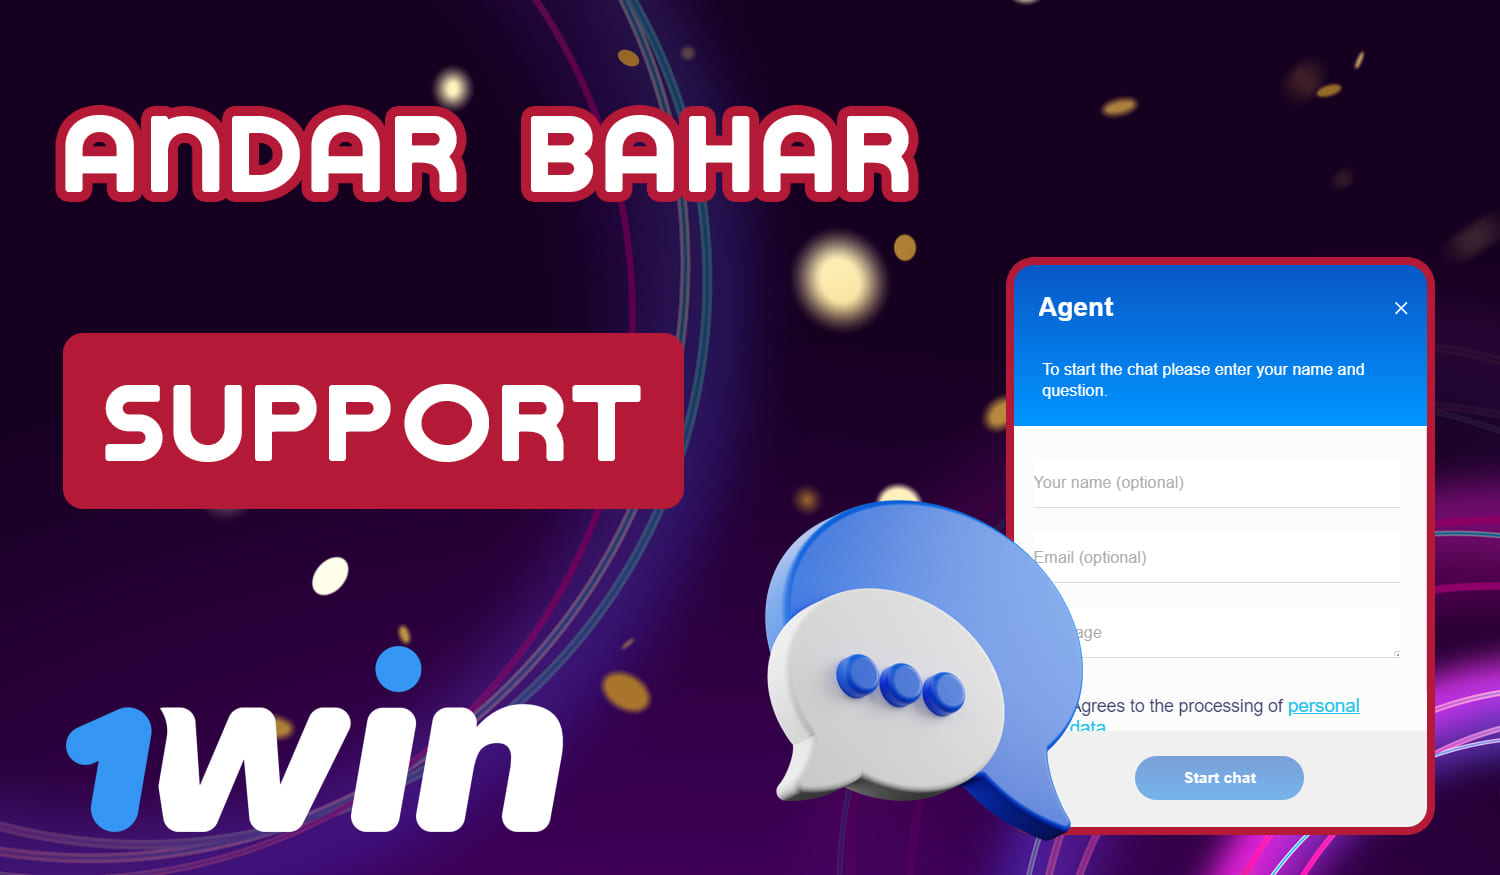 How Indian 1win users can contact support